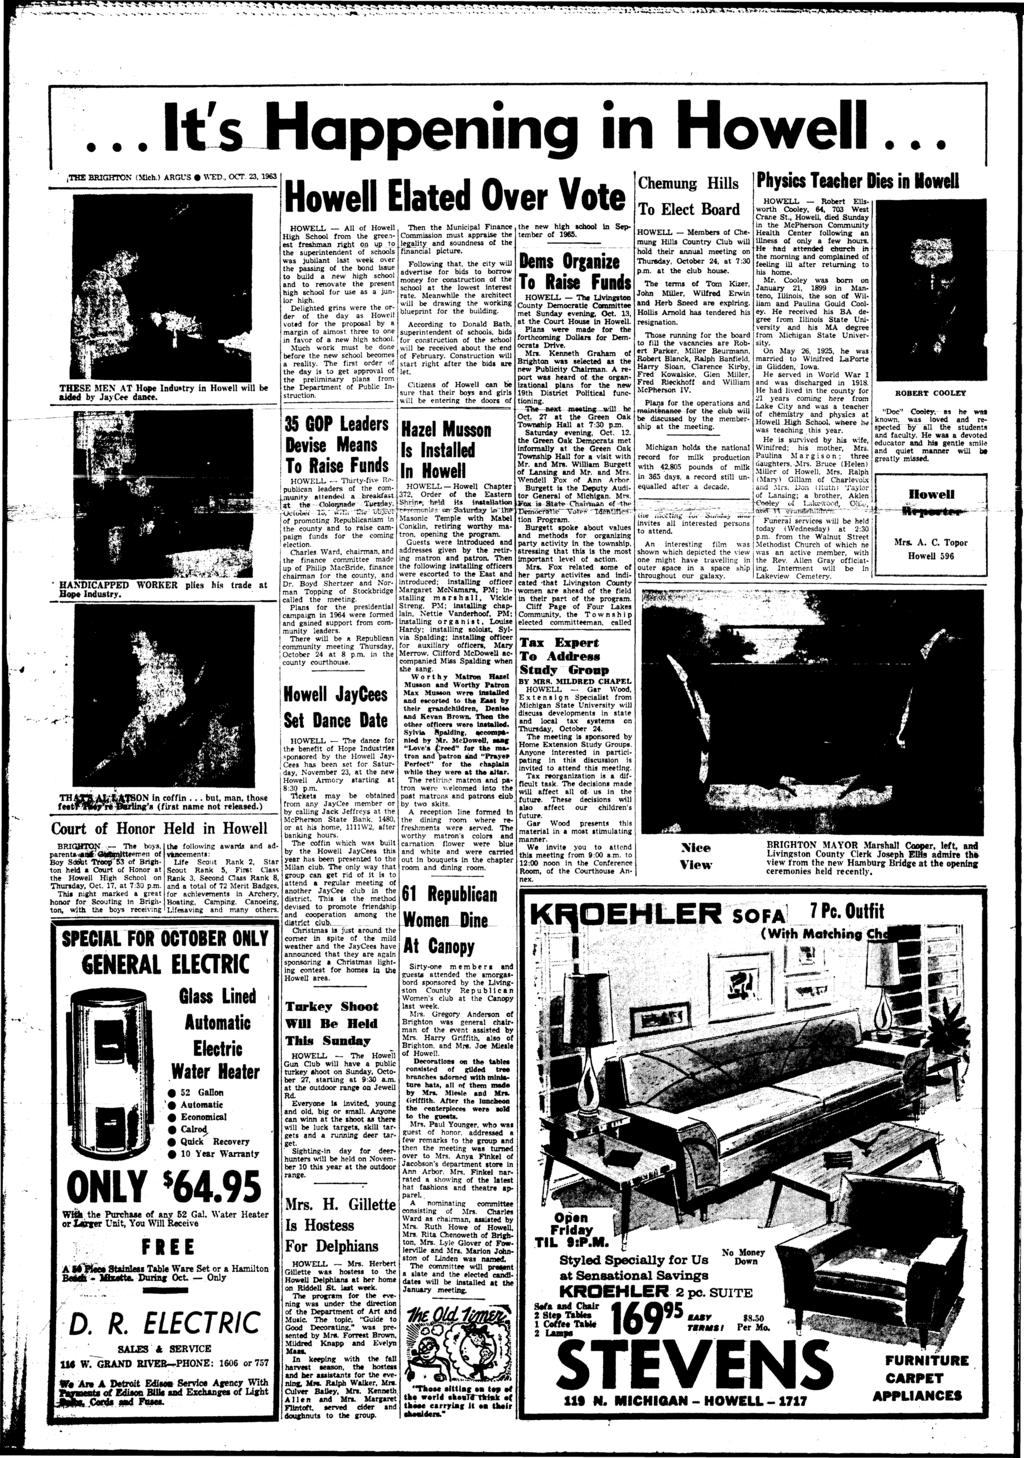 It's Happening in Howell, v-.-. /THE (Mich.) ARGUS WED., OCT. 23, 1963 THESE MEN AT Hope Industry in Howell will be aided by JayCee dance. _ ' HANDICAPPED WORKER plies his trade at Hope Industry.